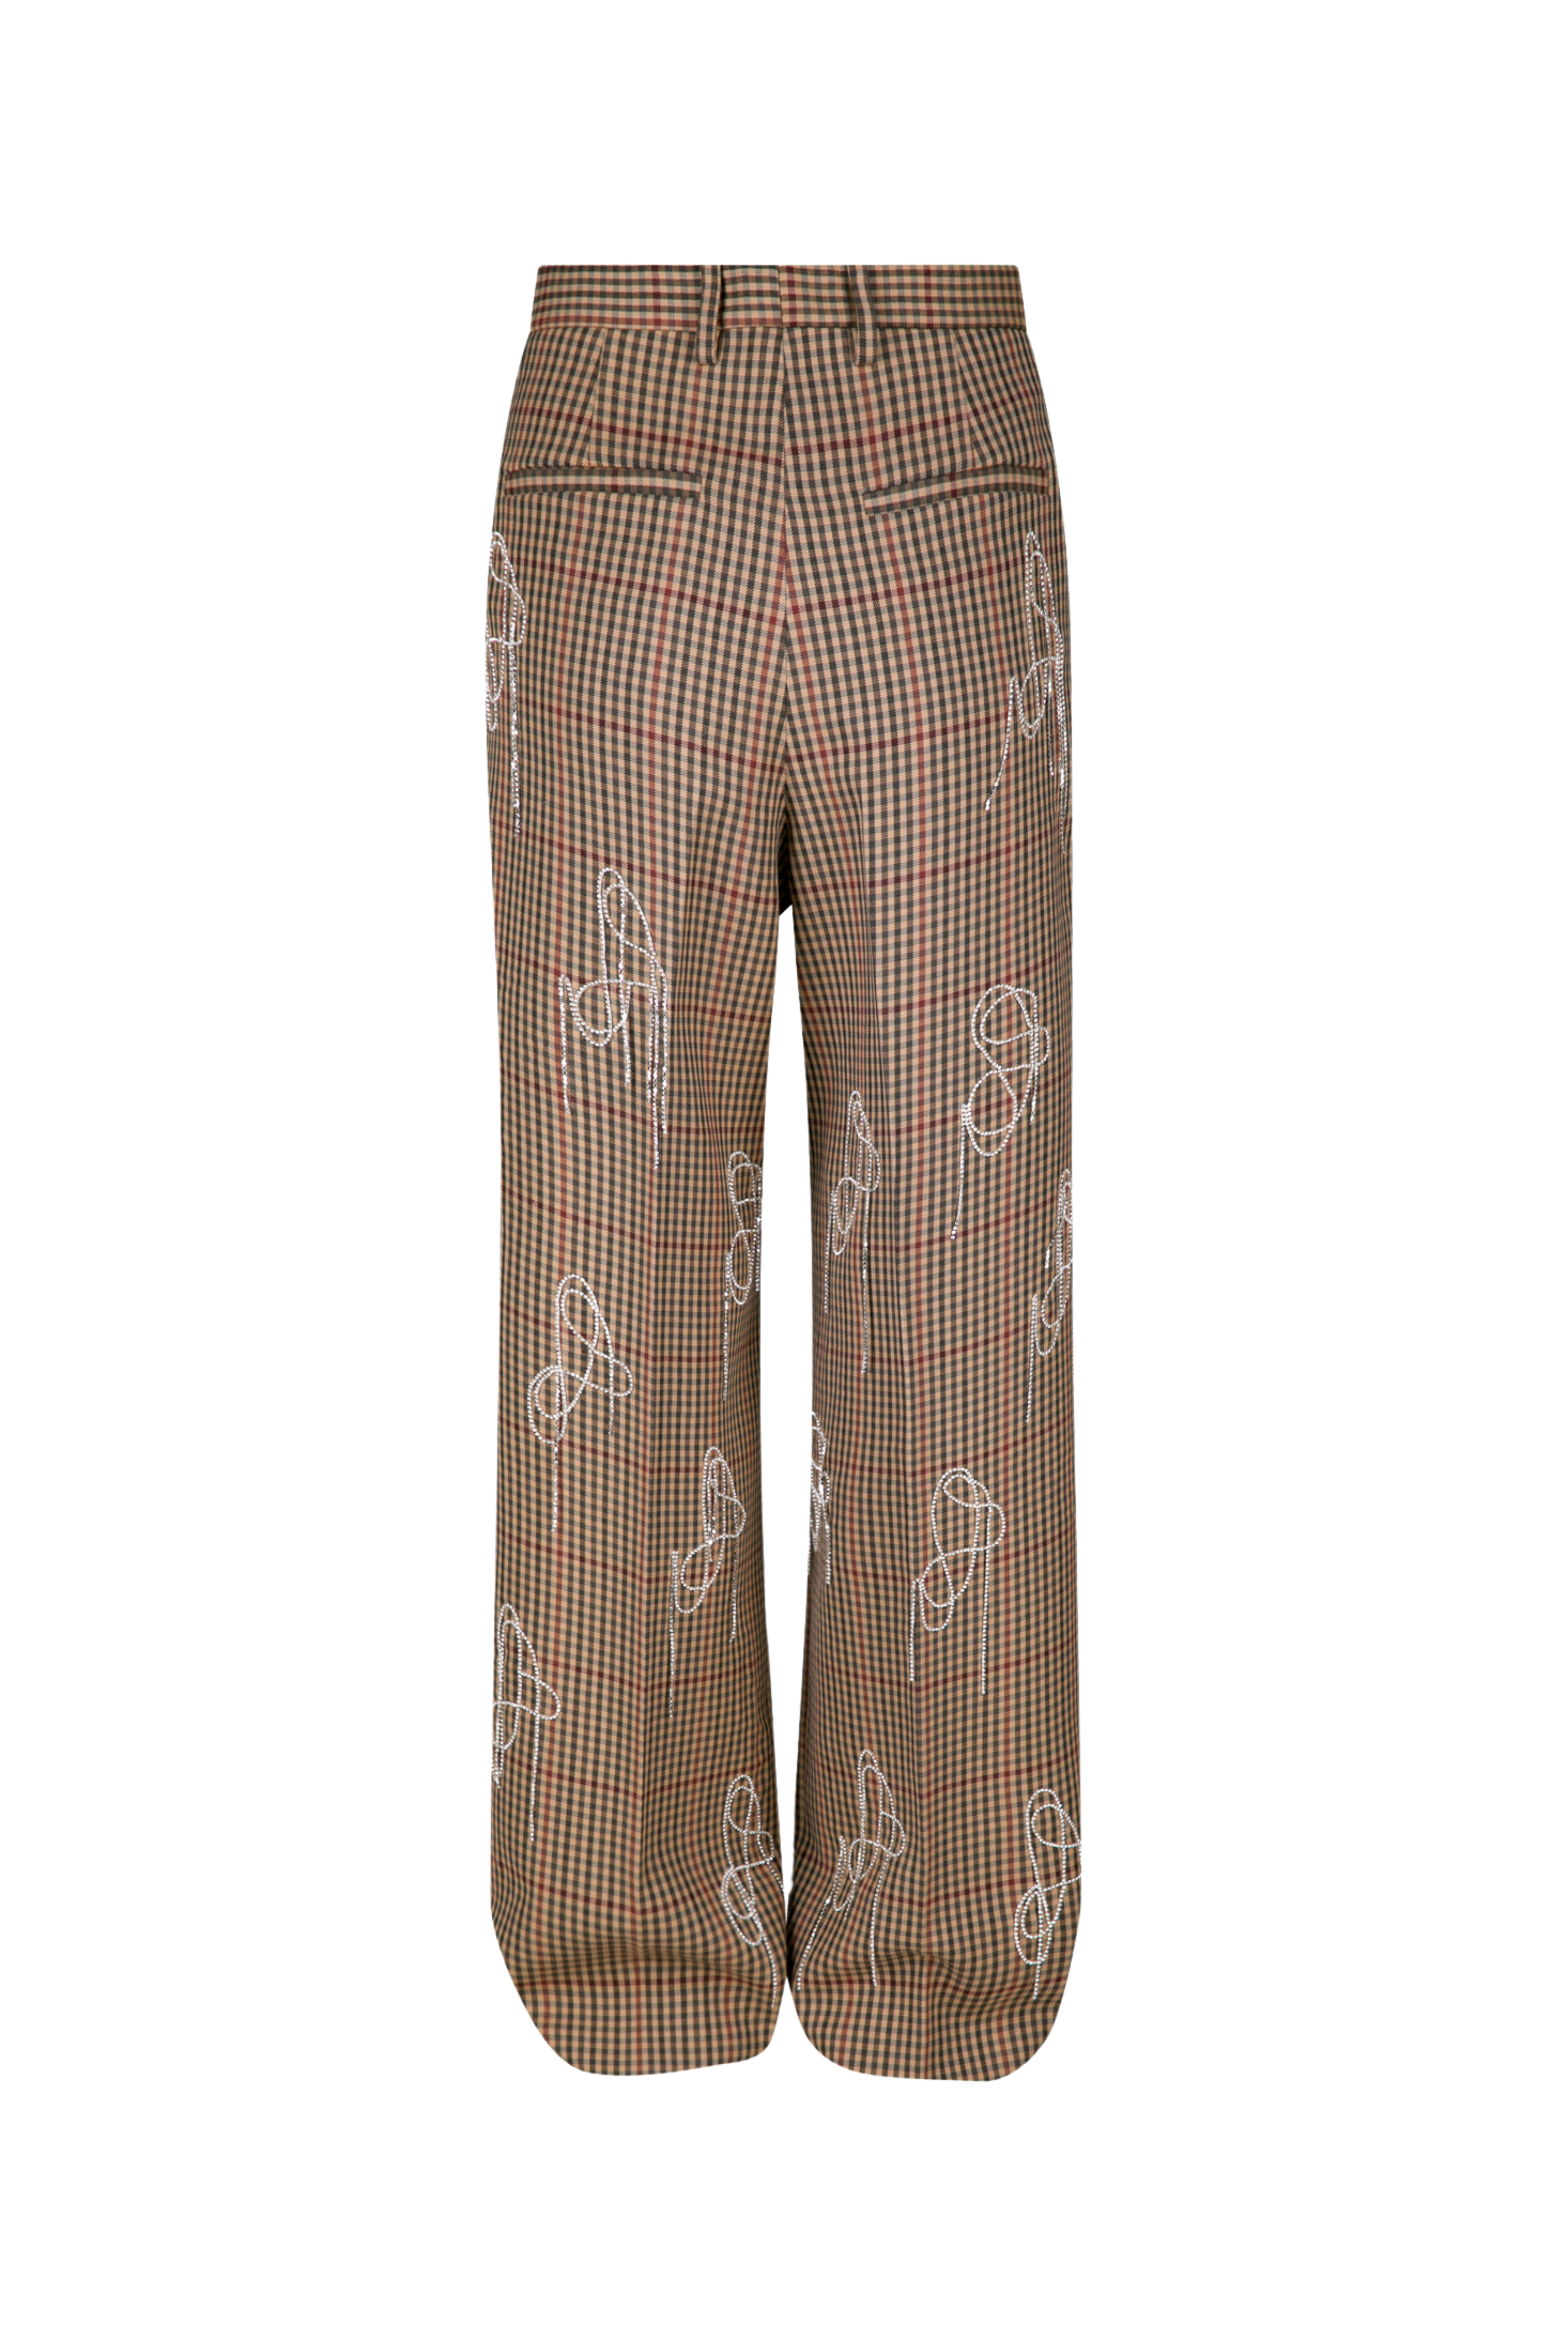 Porter Embroidered Pants